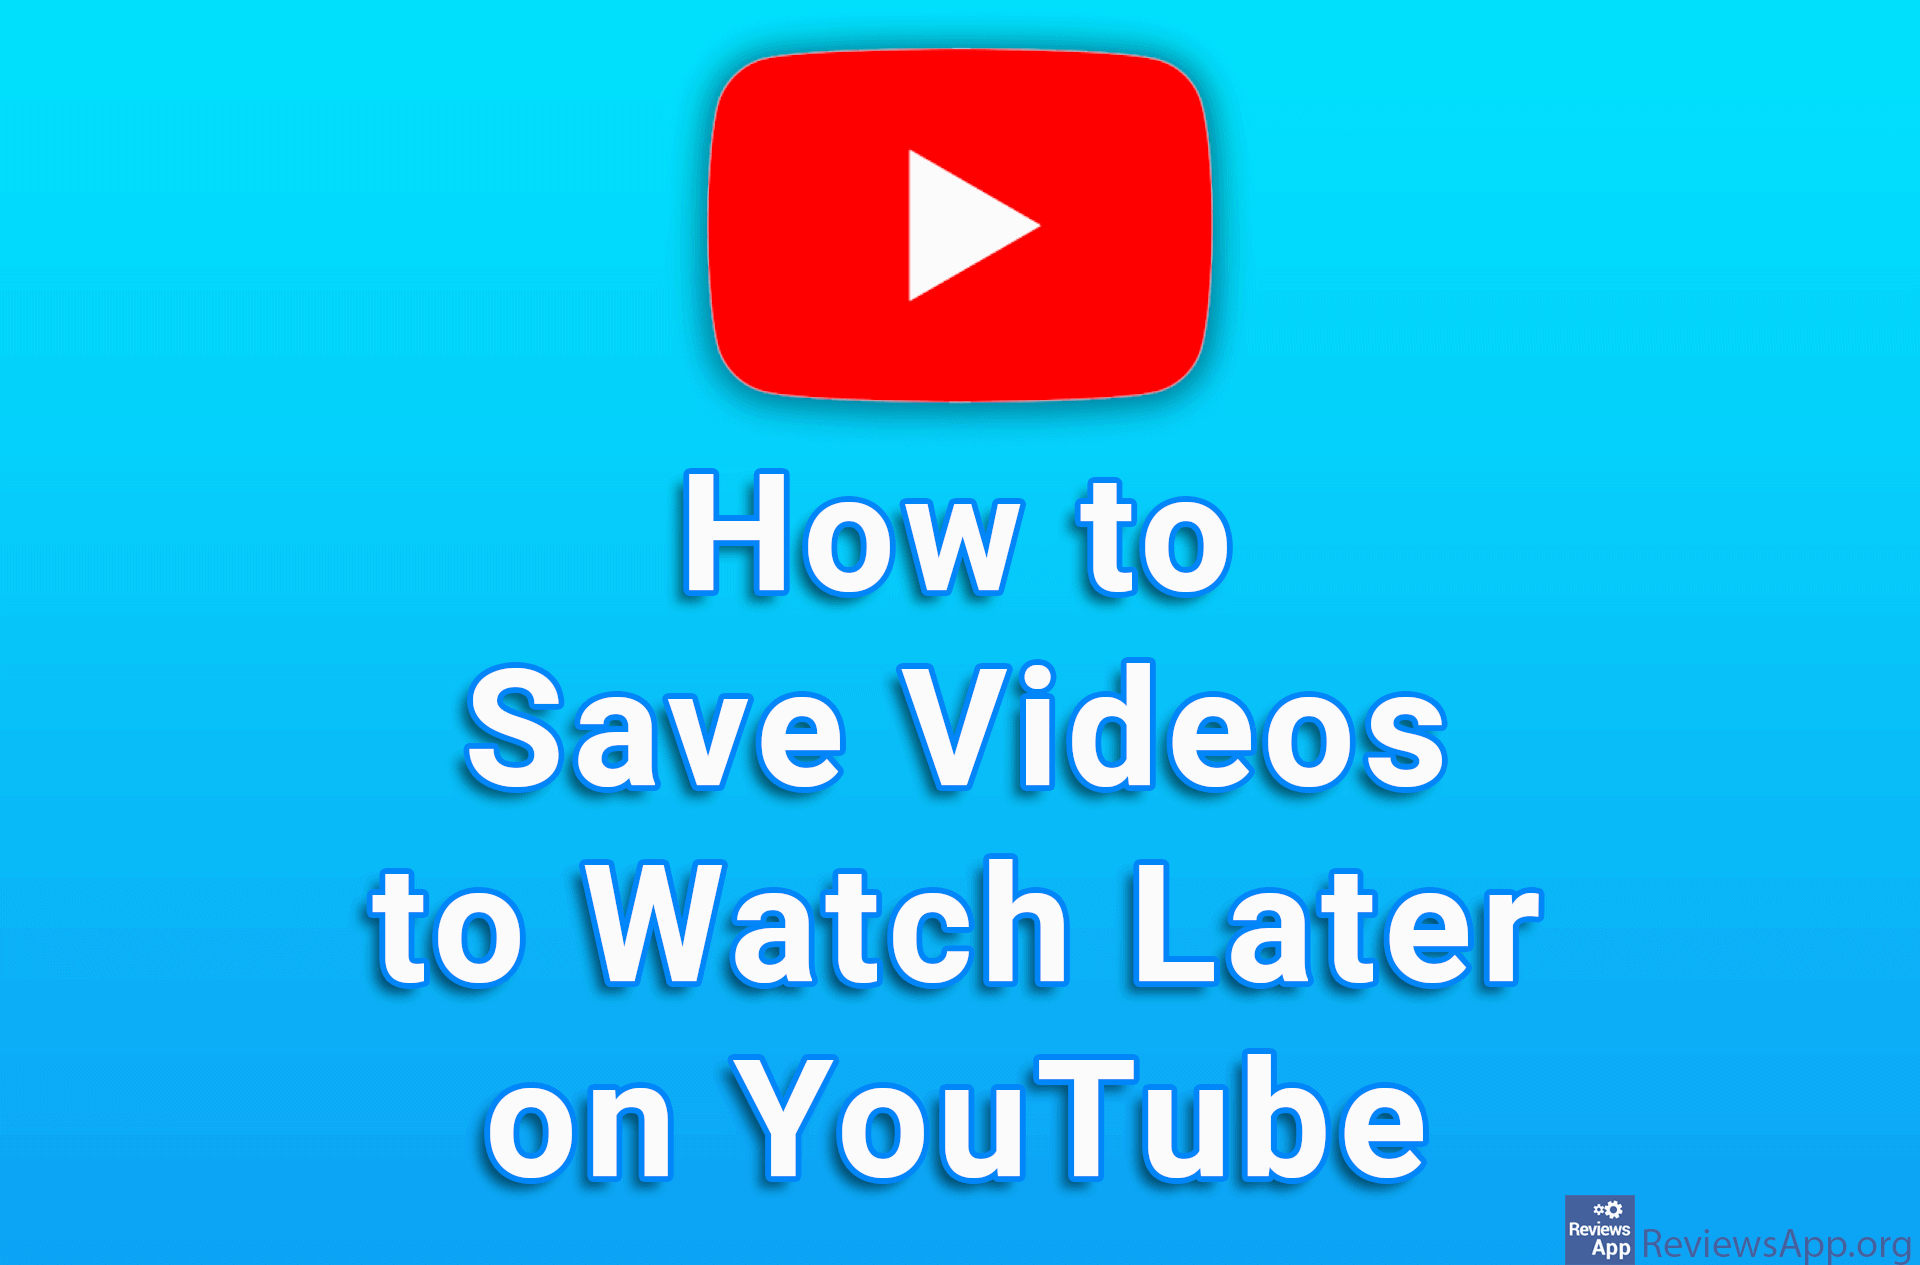 How to Save Videos to Watch Later on YouTube